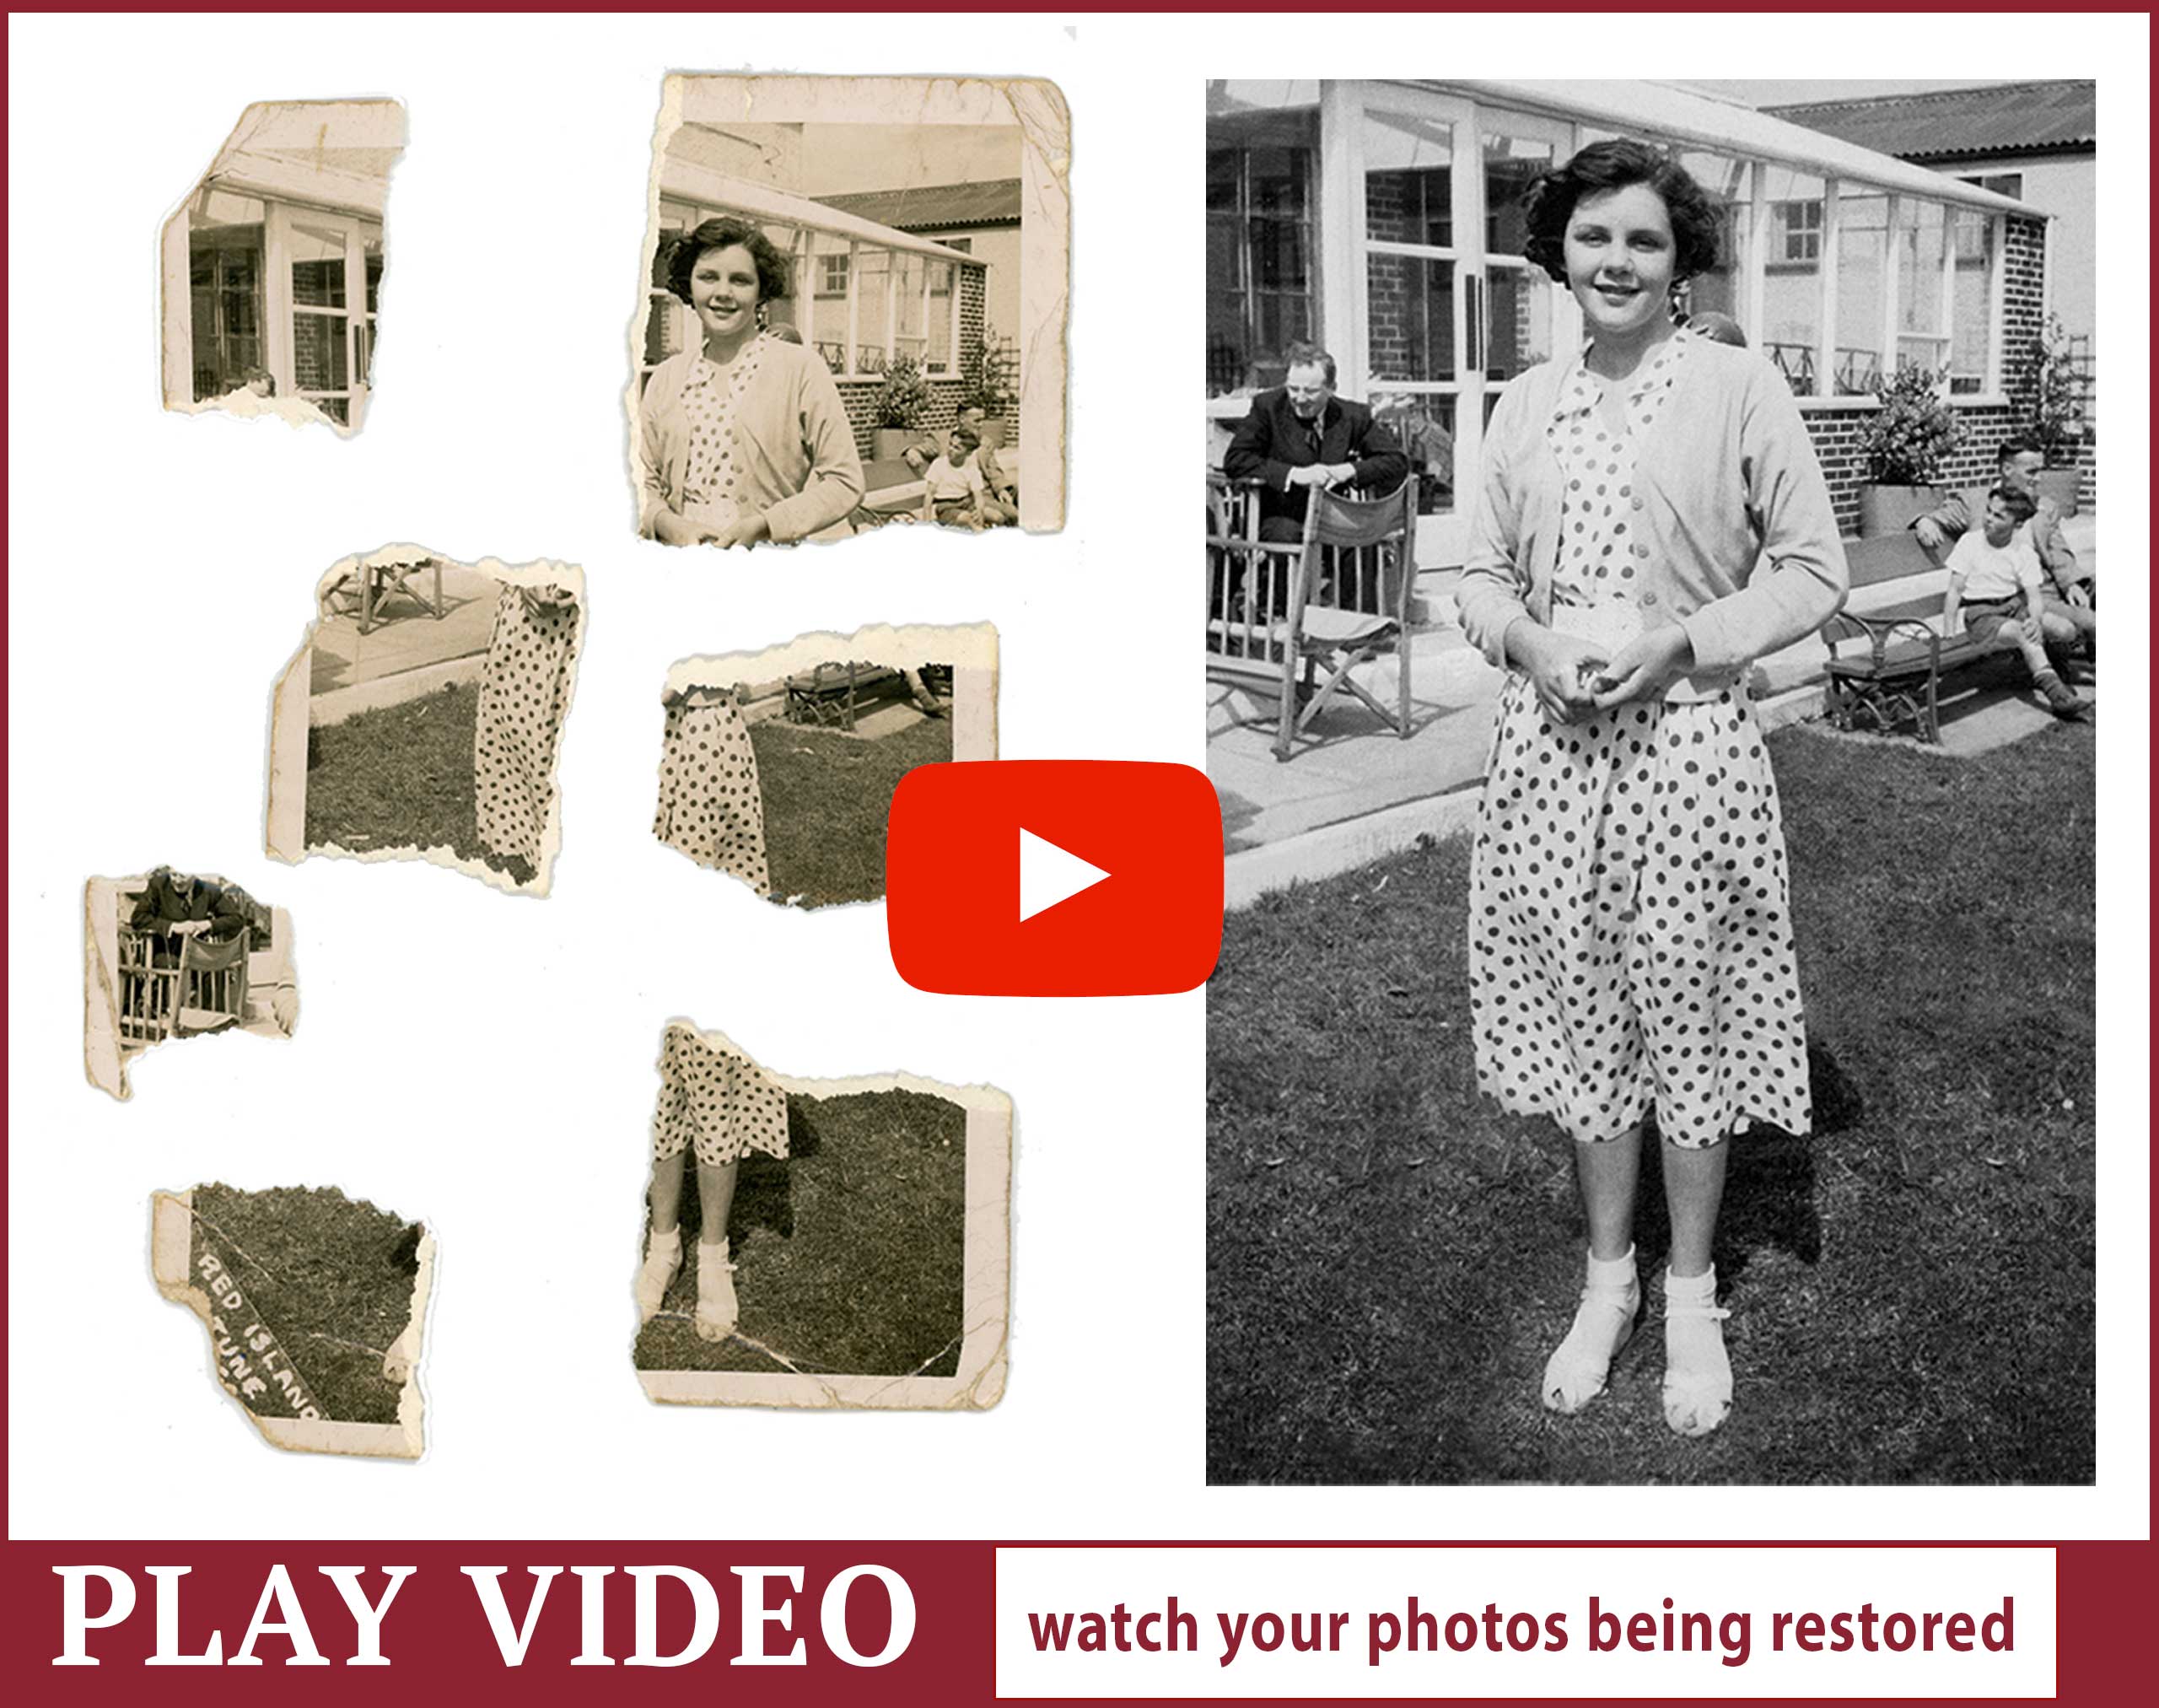 Watch our 30 second video clip to see how we rebuild and restore your torn and ripped photographs - no matter how many pieces they're in!